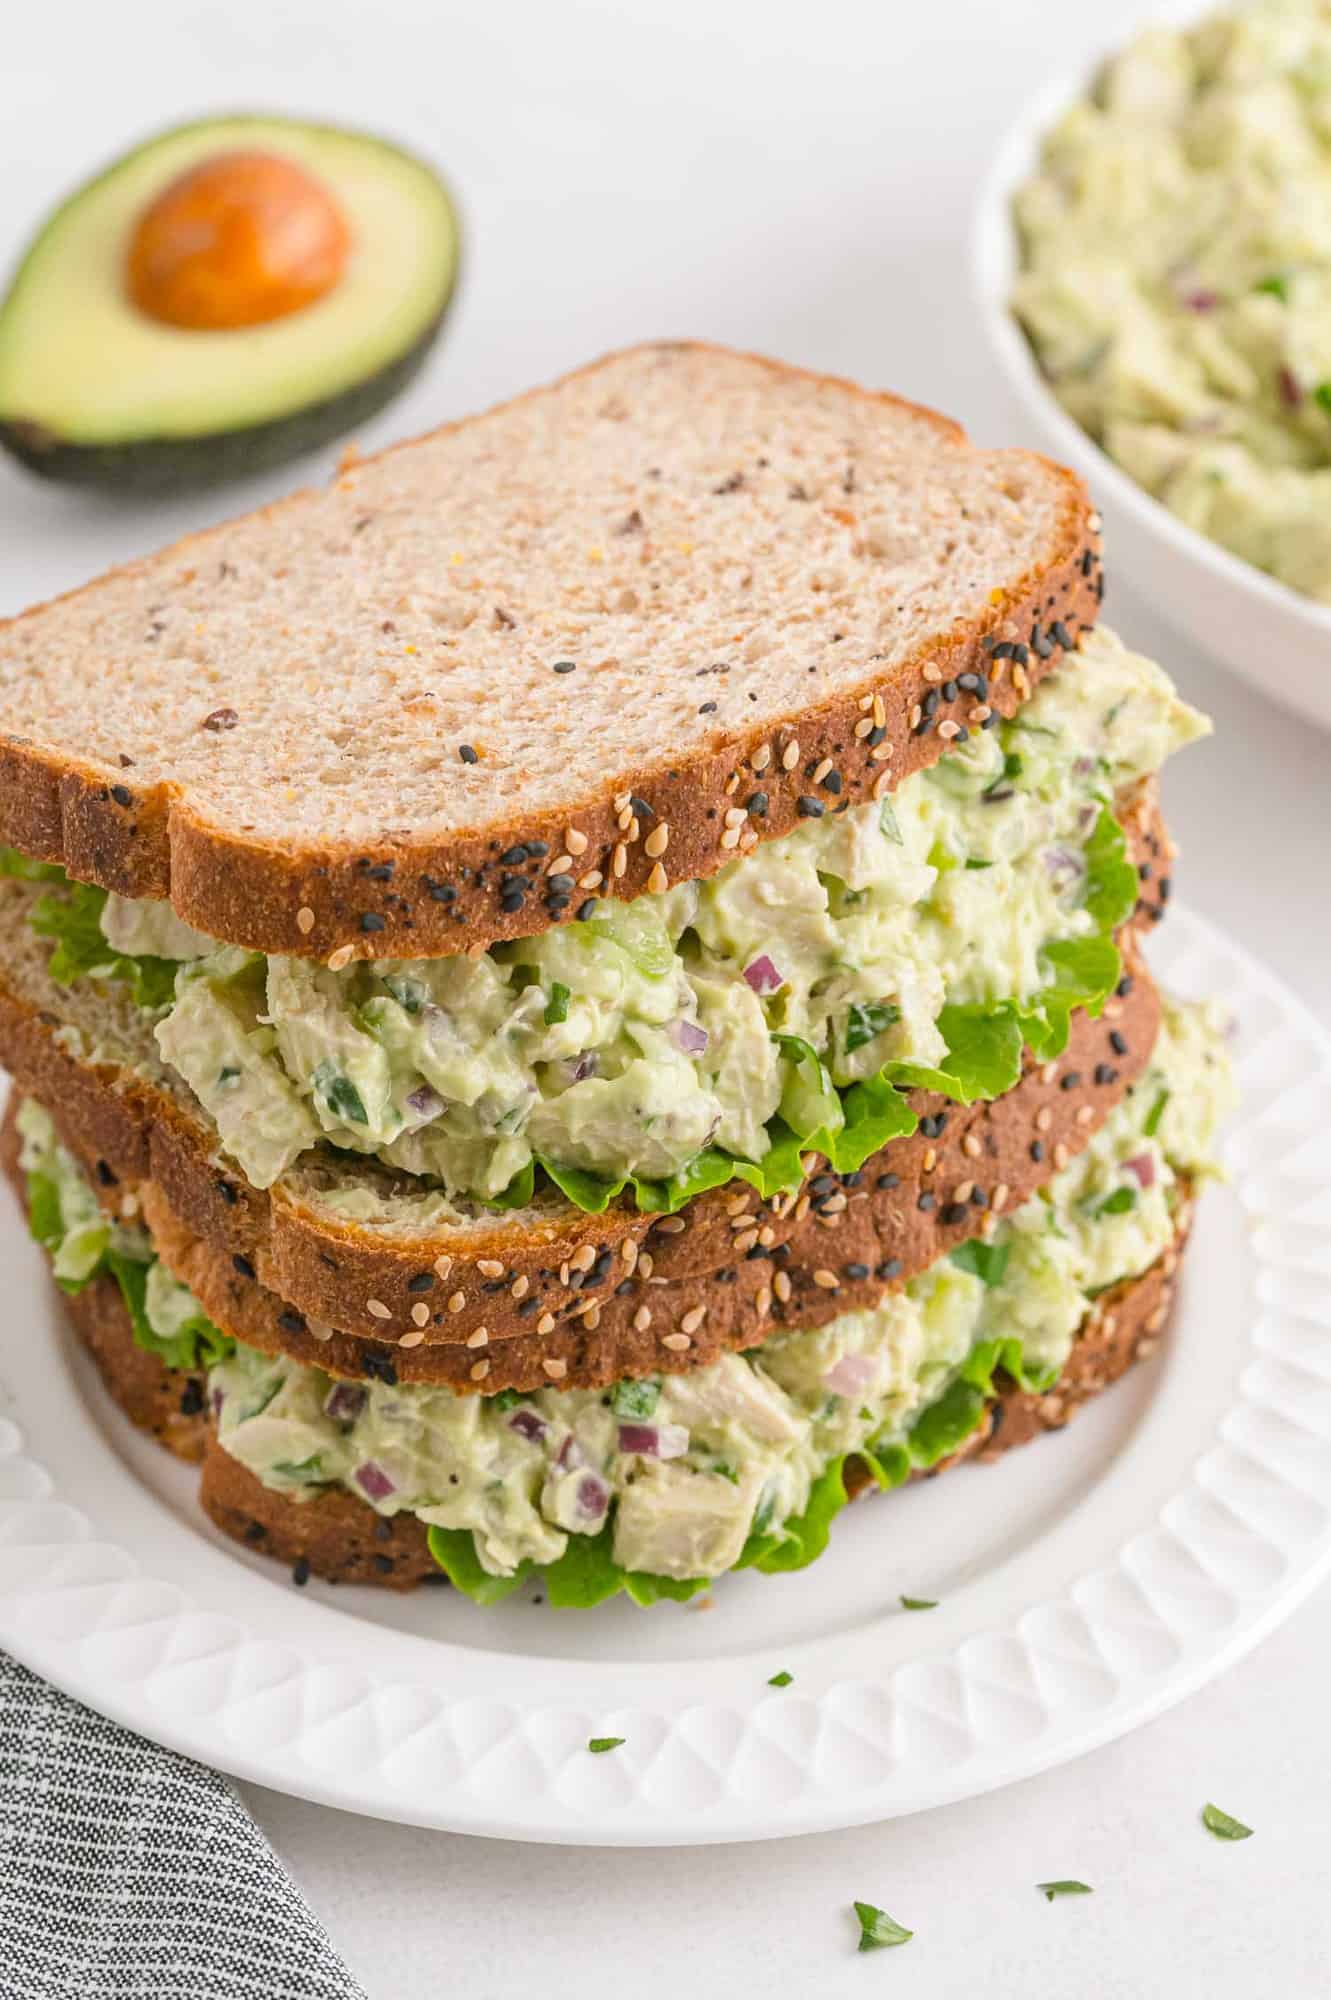 Double stack of avocado chicken salad sandwiches on wheat bread.